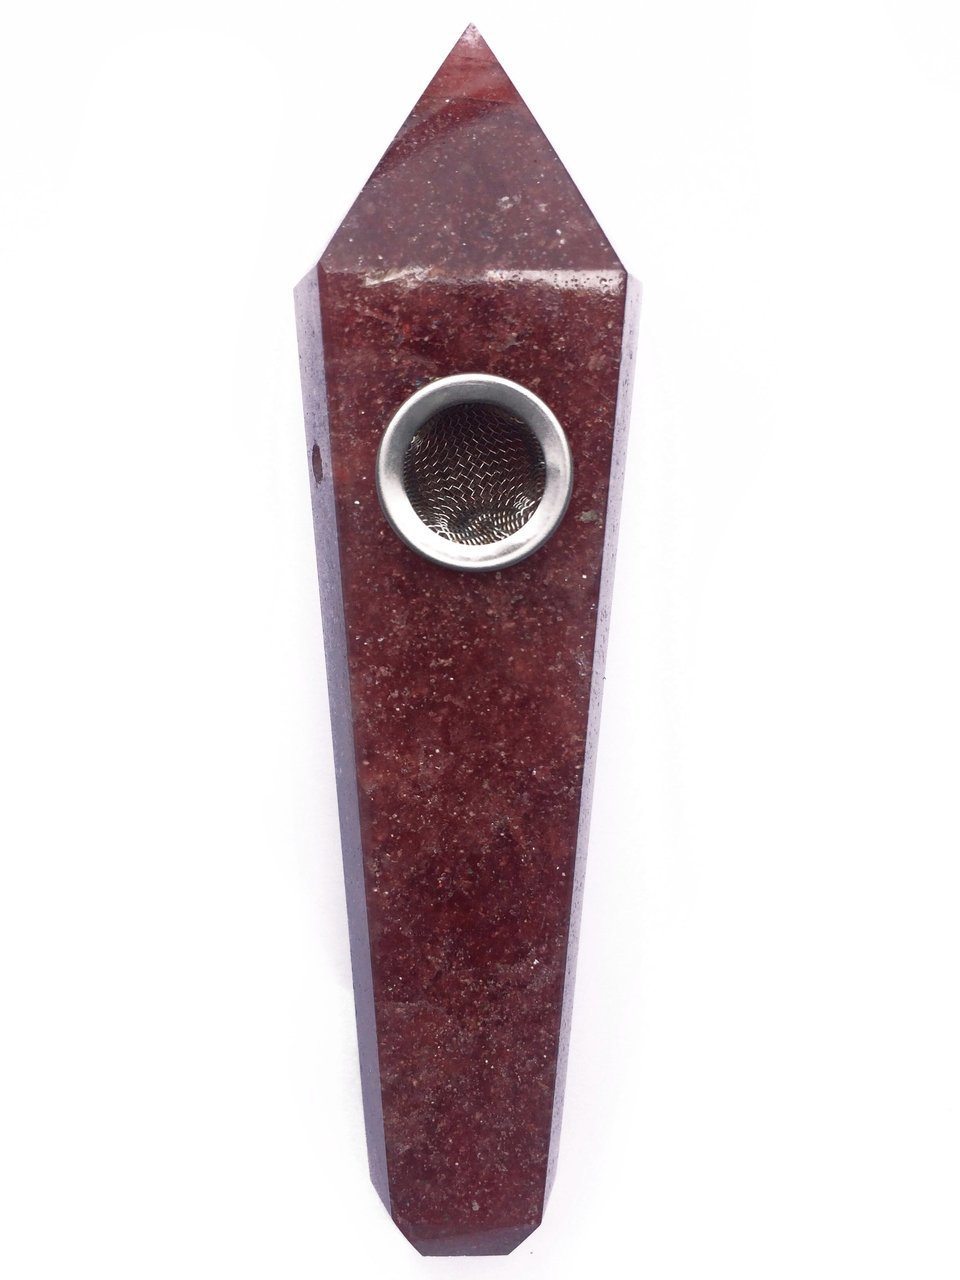 Starfire- Strawberry Quartz Crystal Smoke Pipe at Flower Power Packages